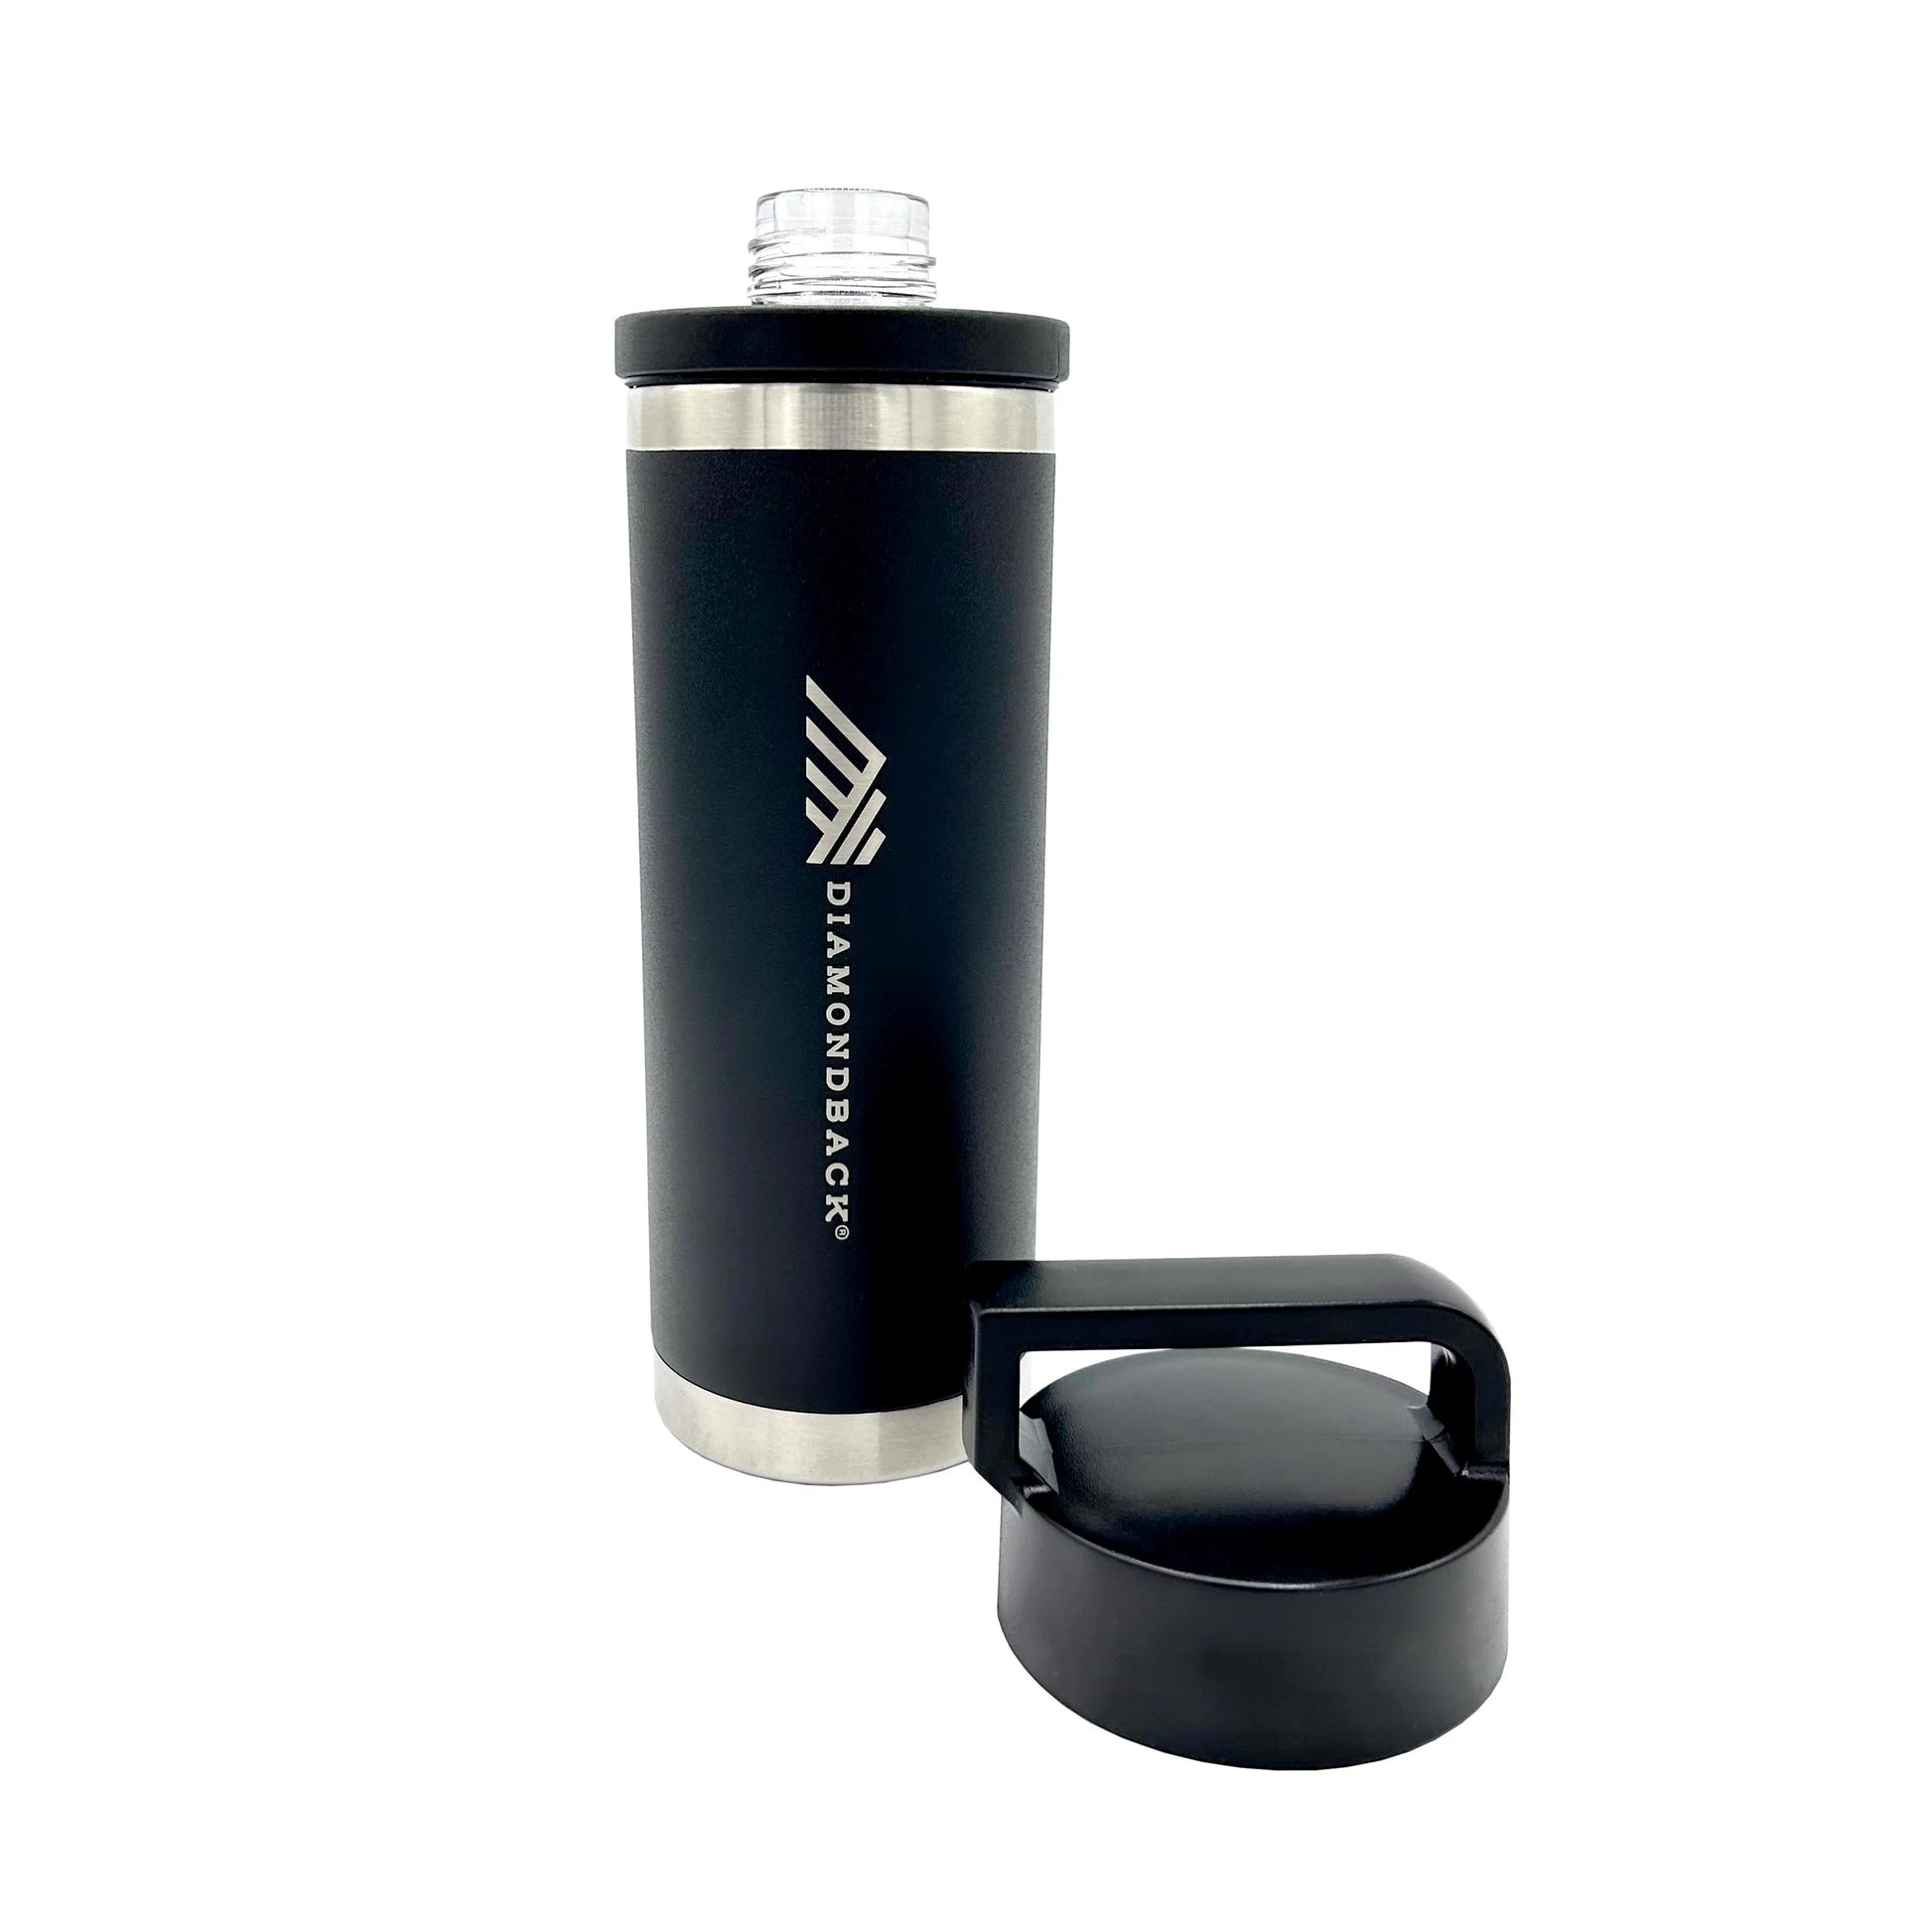 Stylish and sturdy H2Go drink bottle, designed for active lifestyles, with advanced insulation technology and suitable for hot and cold beverages.